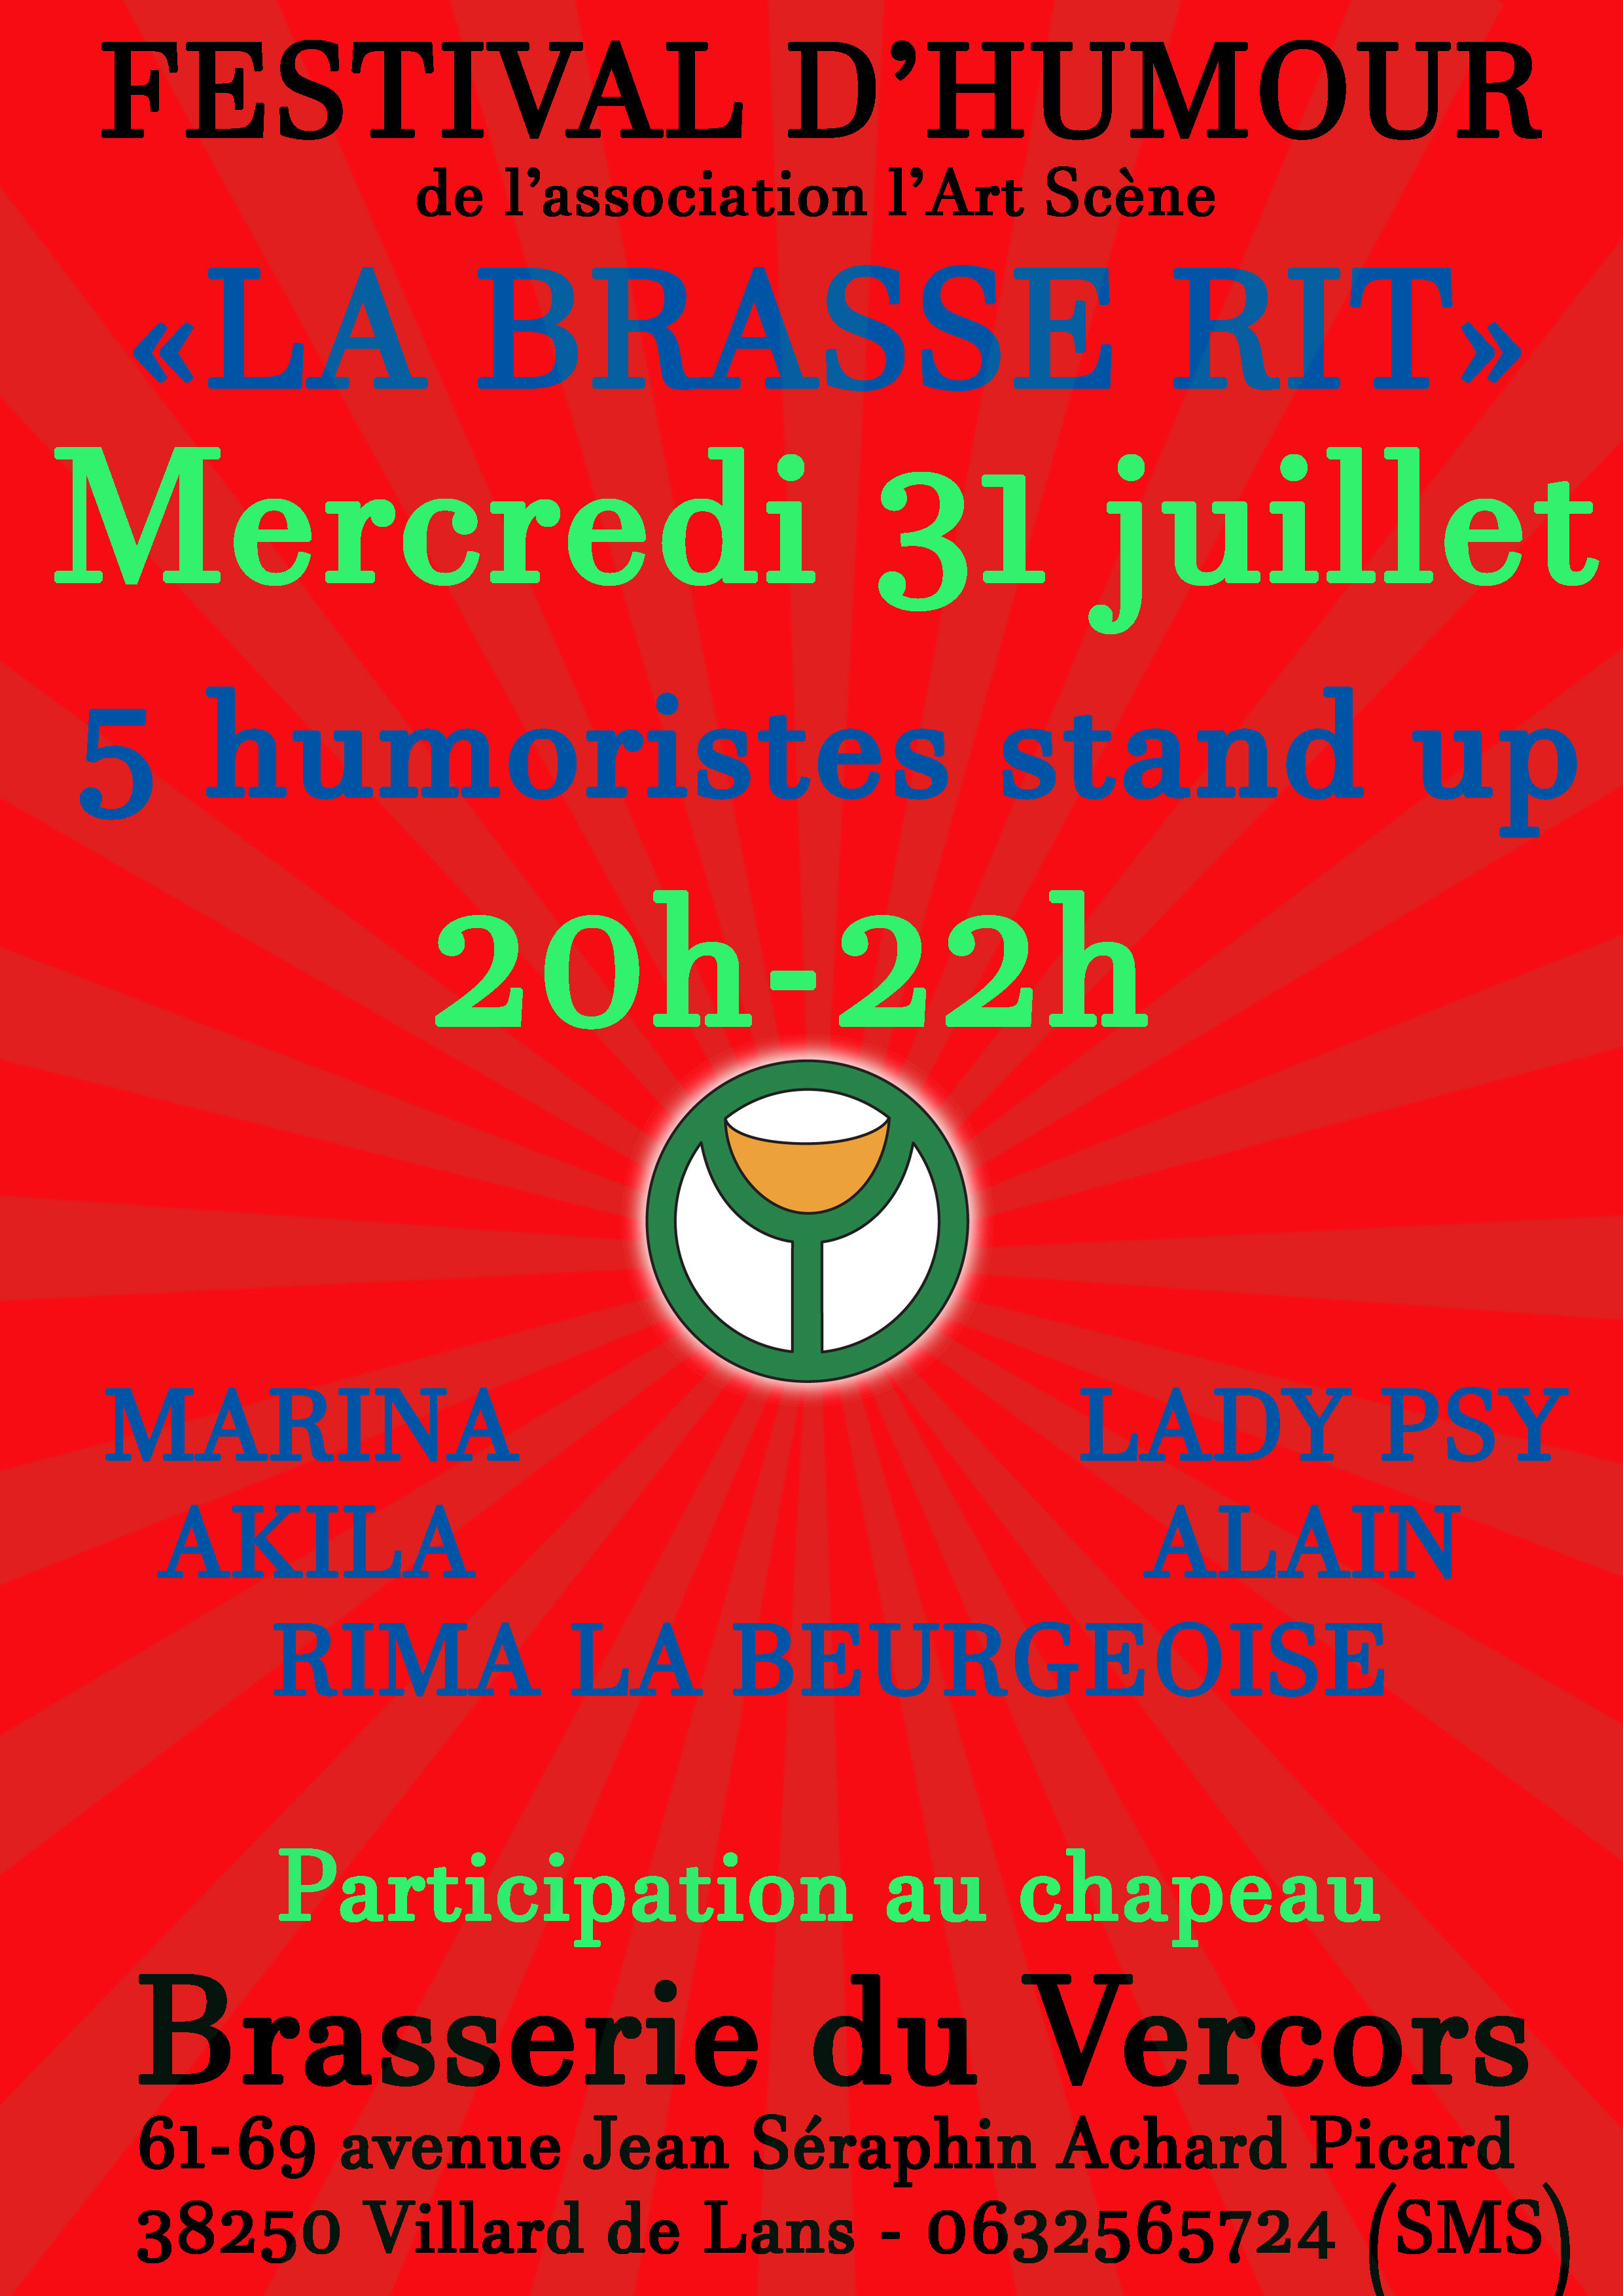 5 Humouristes Stand Up